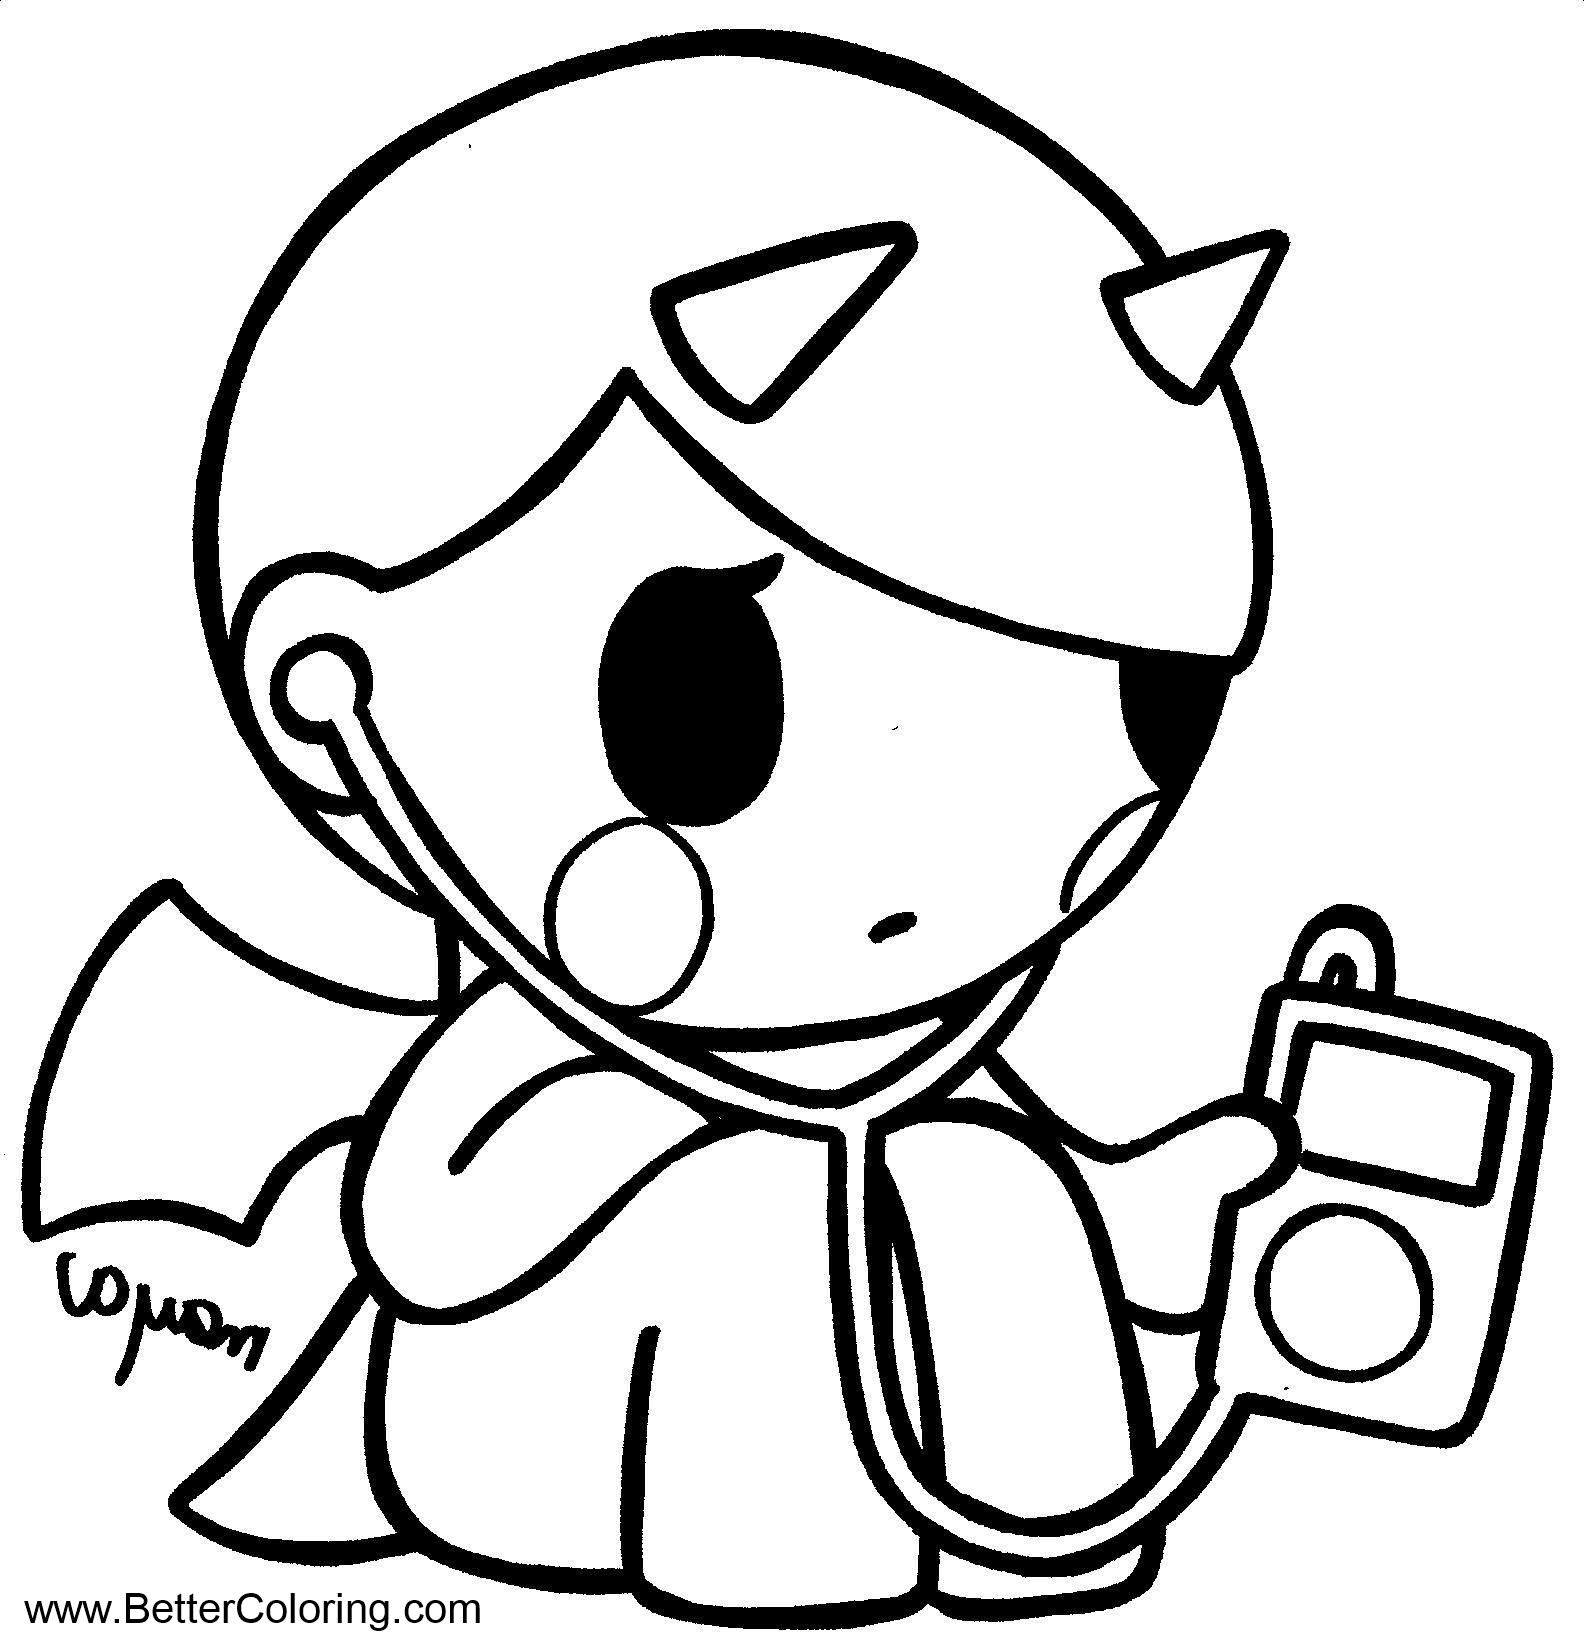 Tokidoki Coloring Pages Line Art - Free Printable Coloring Pages